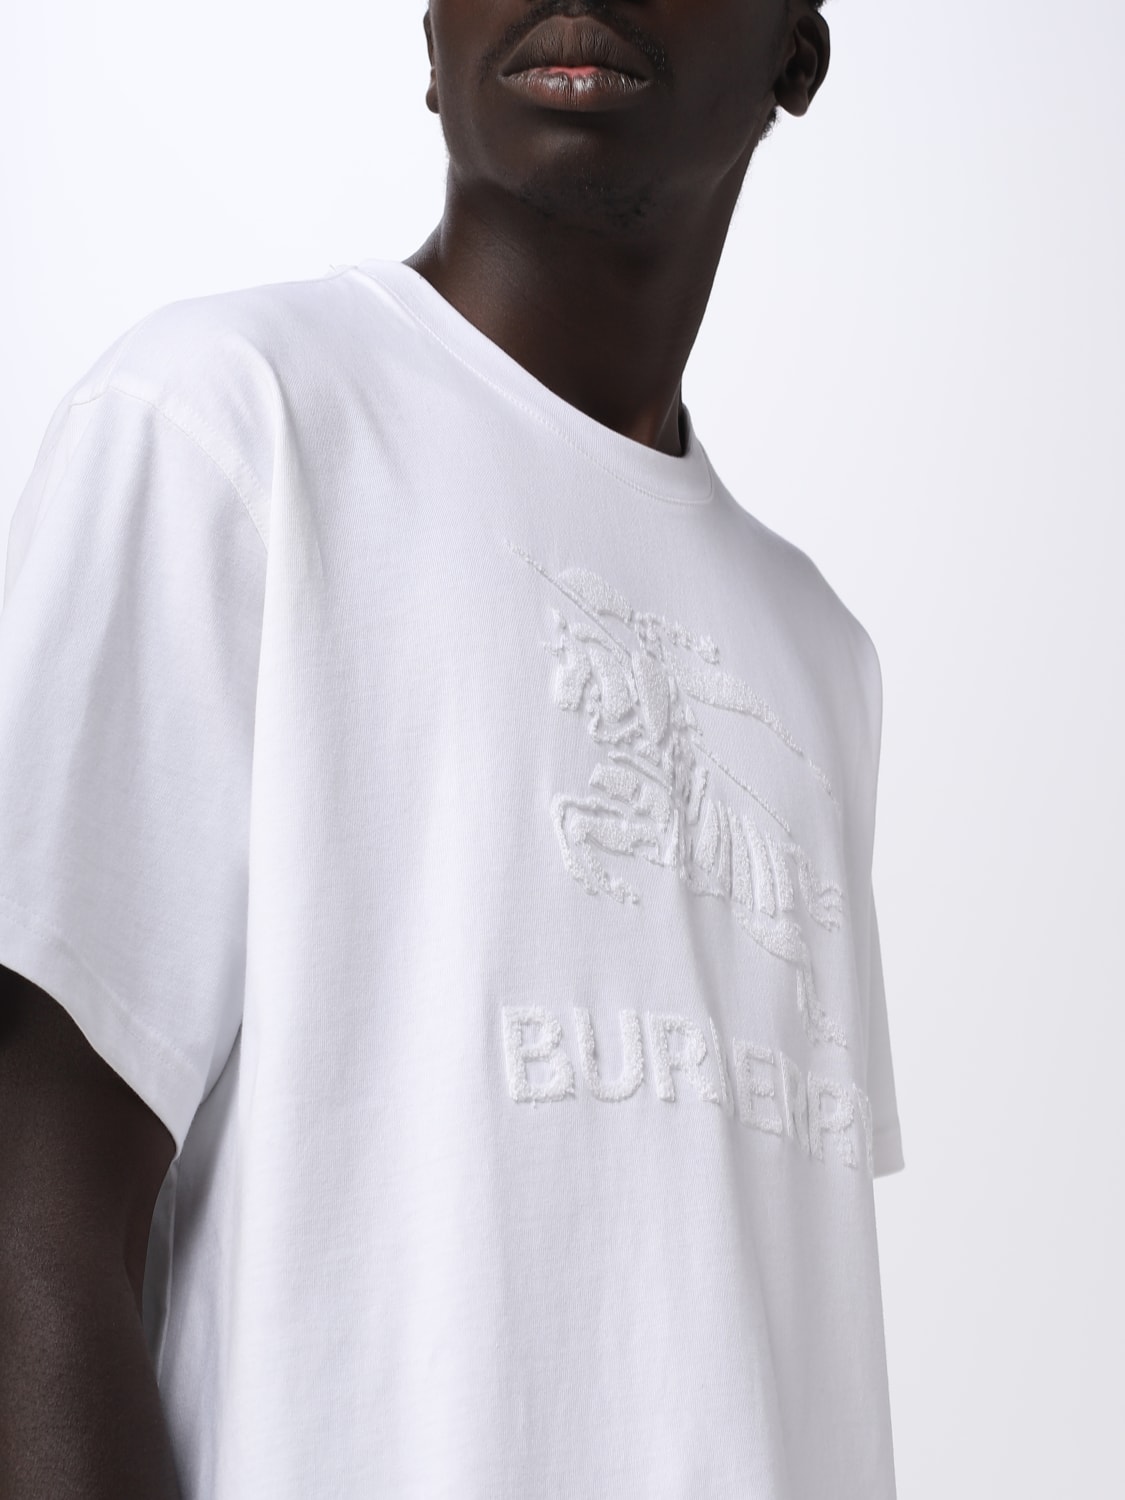 Burberry T-shirt in cotton jersey